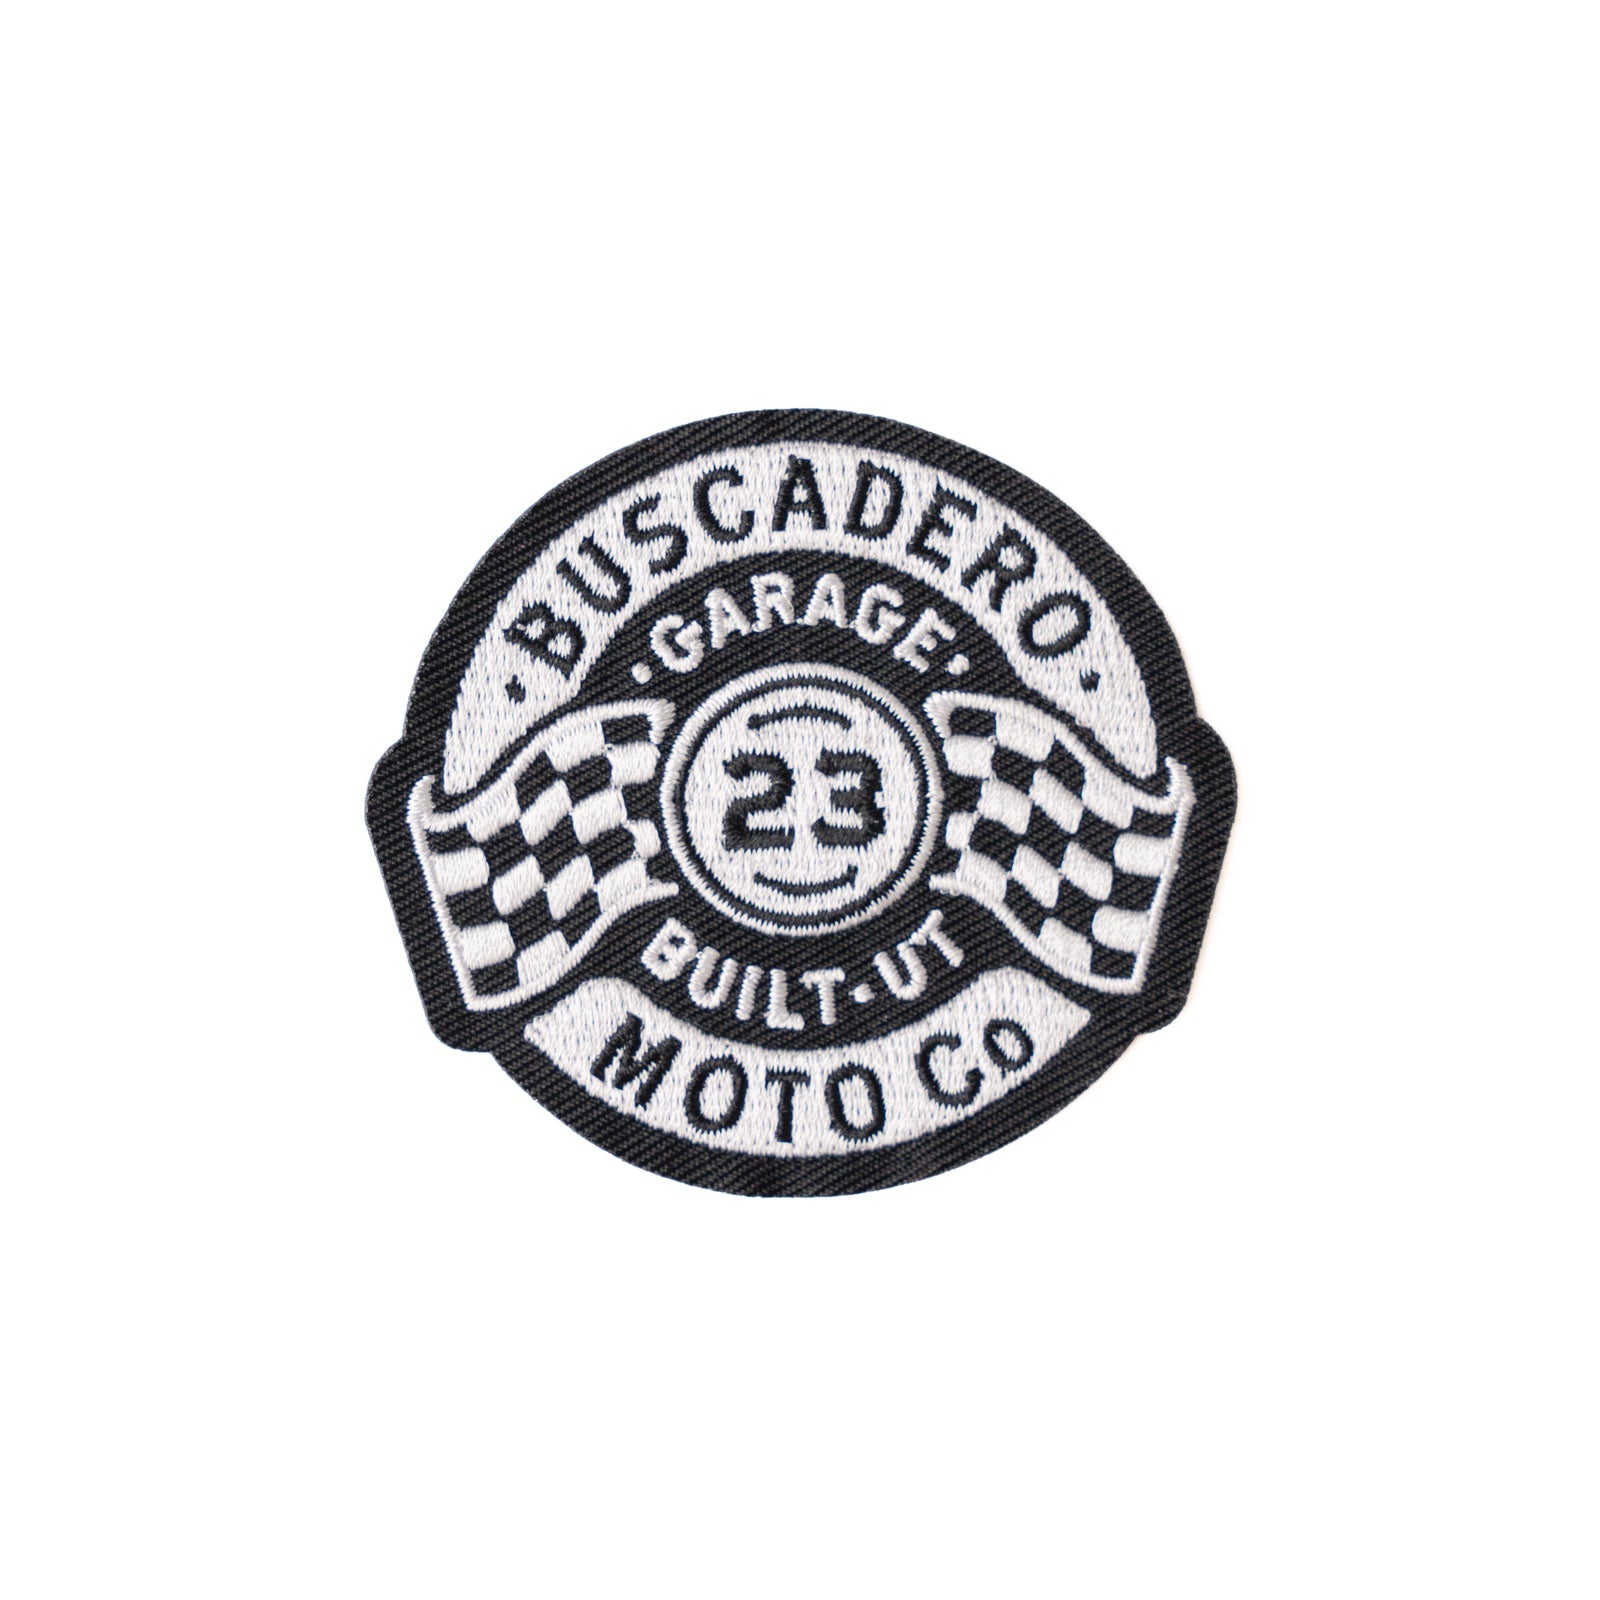 'Garage Built' Iron-on Patch - Buscadero Motorcycles